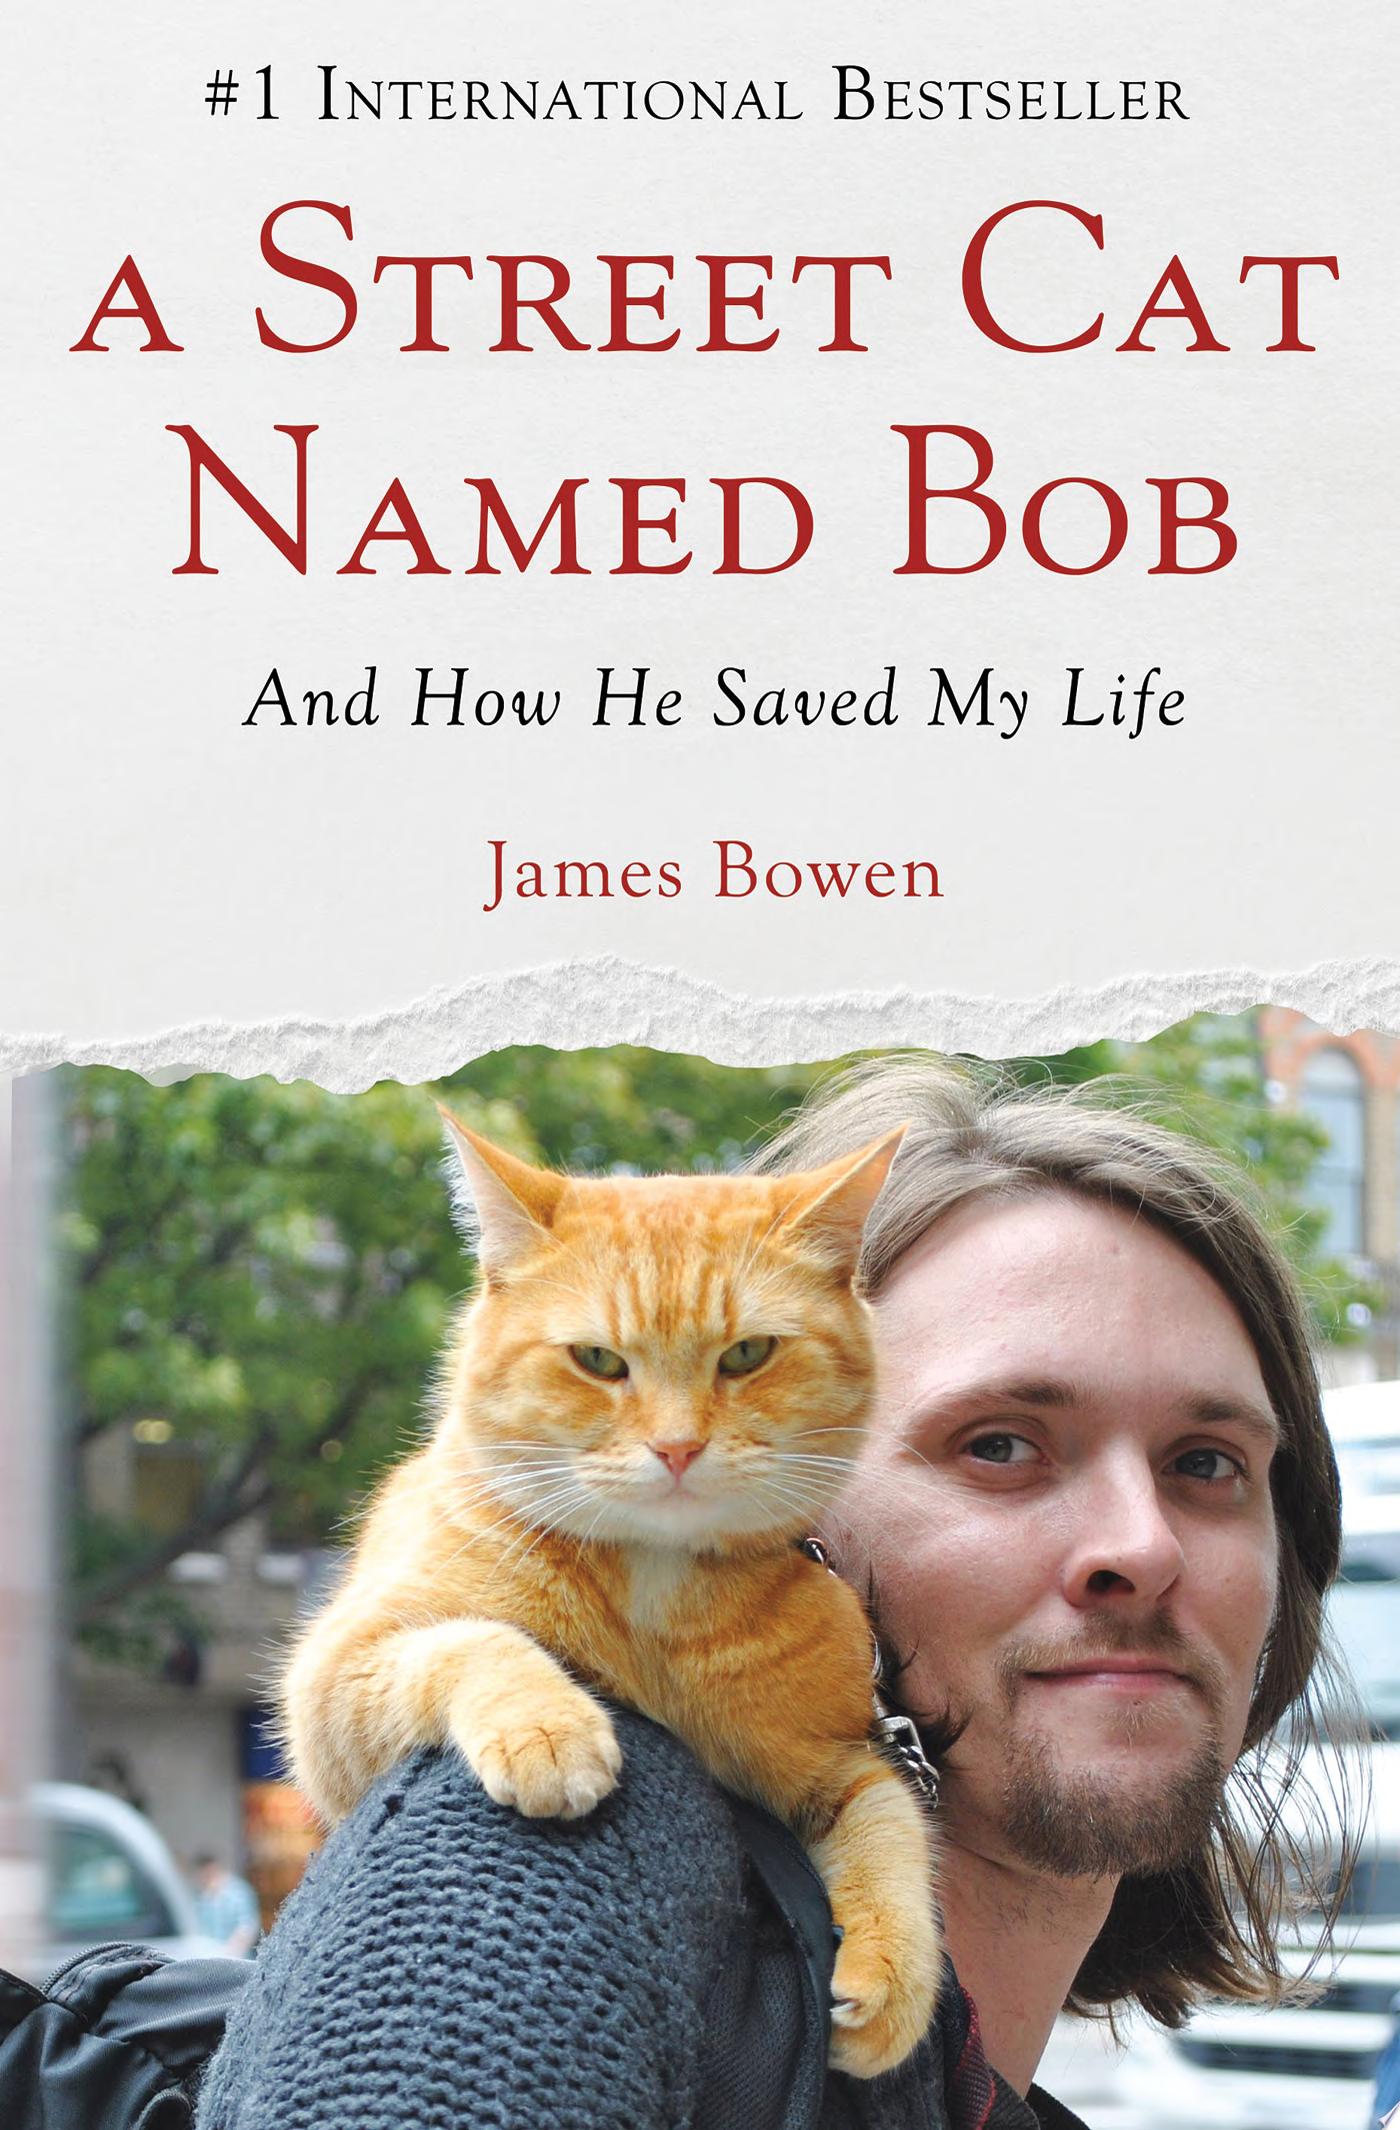 Image for "A Street Cat Named Bob"